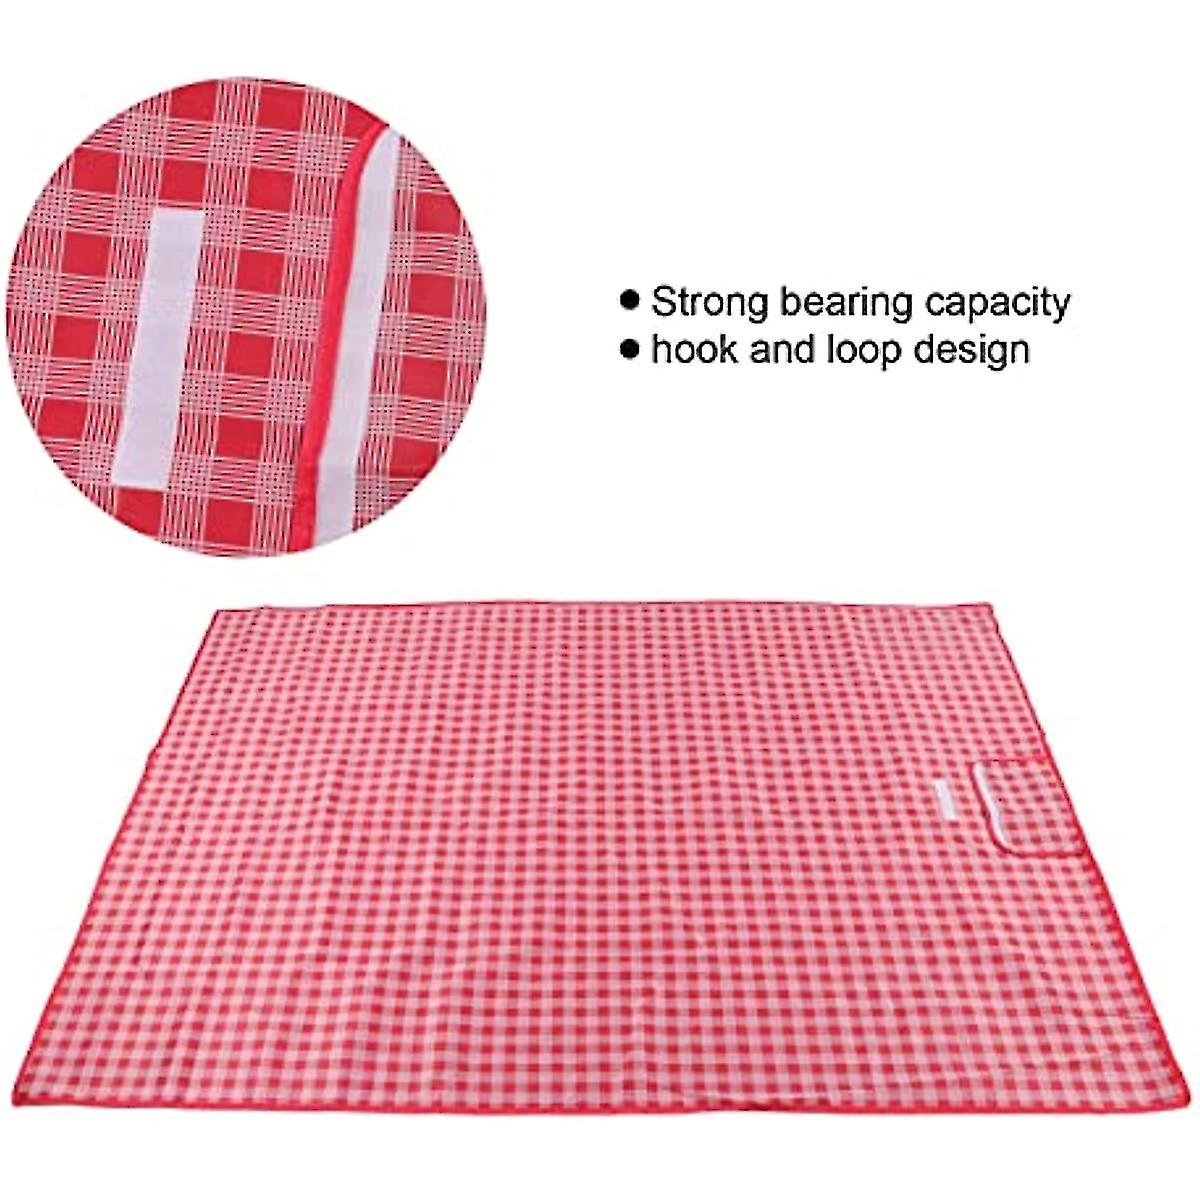 Picnic Blankets 197x144cm Waterproof Sandproof Foldable Compact Beach Blanket Machine Washable Picnic Blanket Portable Outdoor Mat For Spring Summe